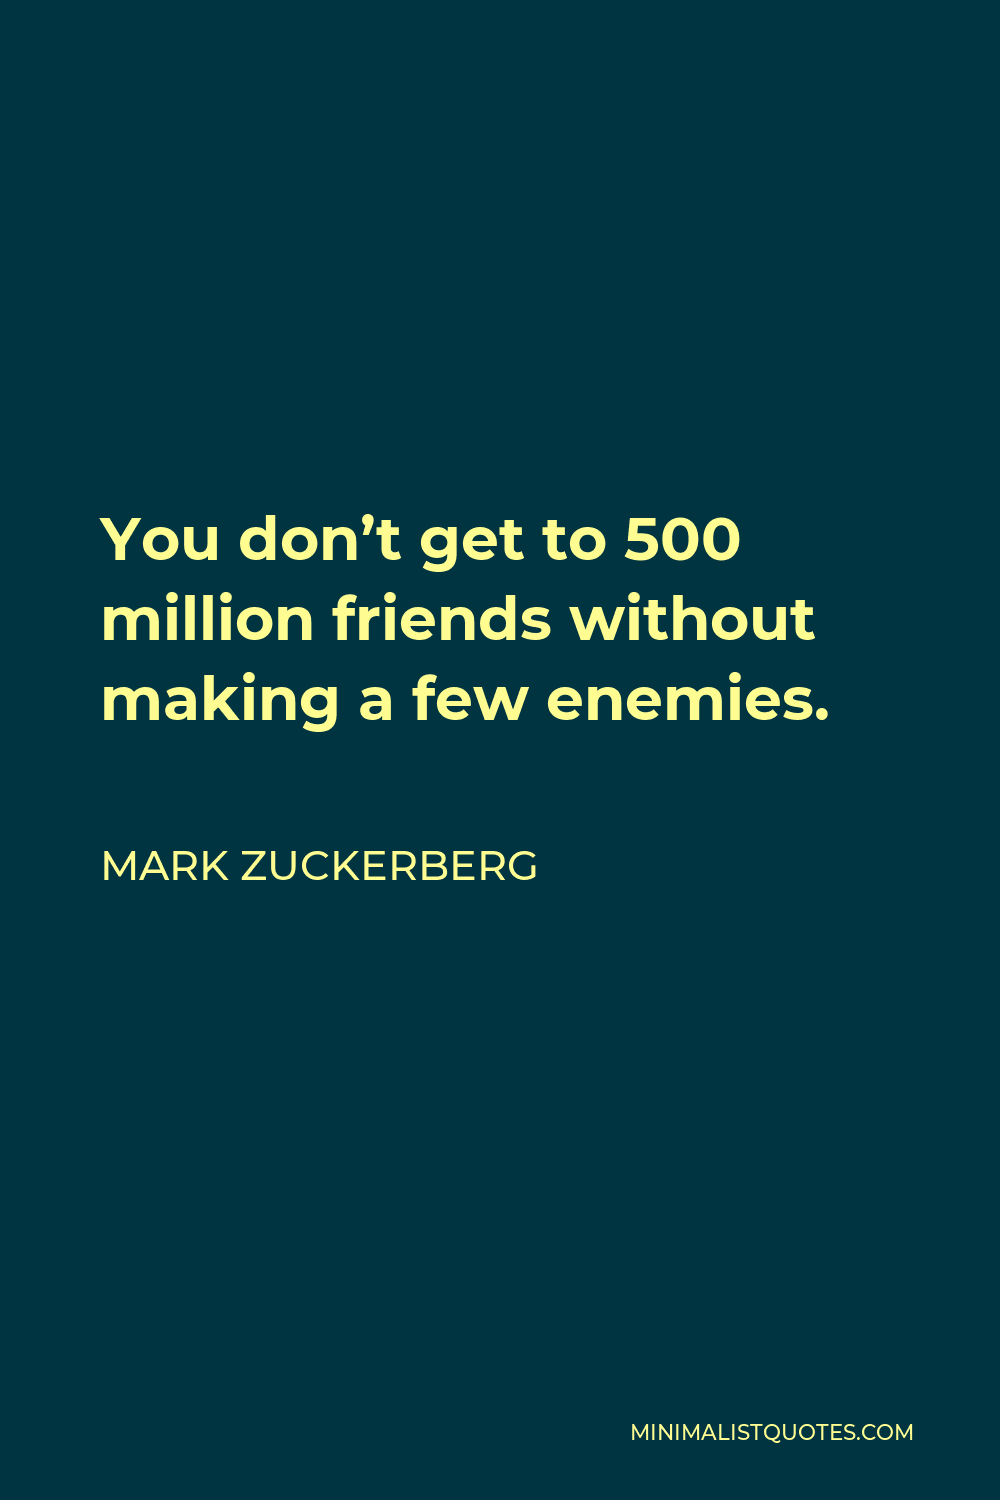 Mark Zuckerberg Quote - You don’t get to 500 million friends without making a few enemies.